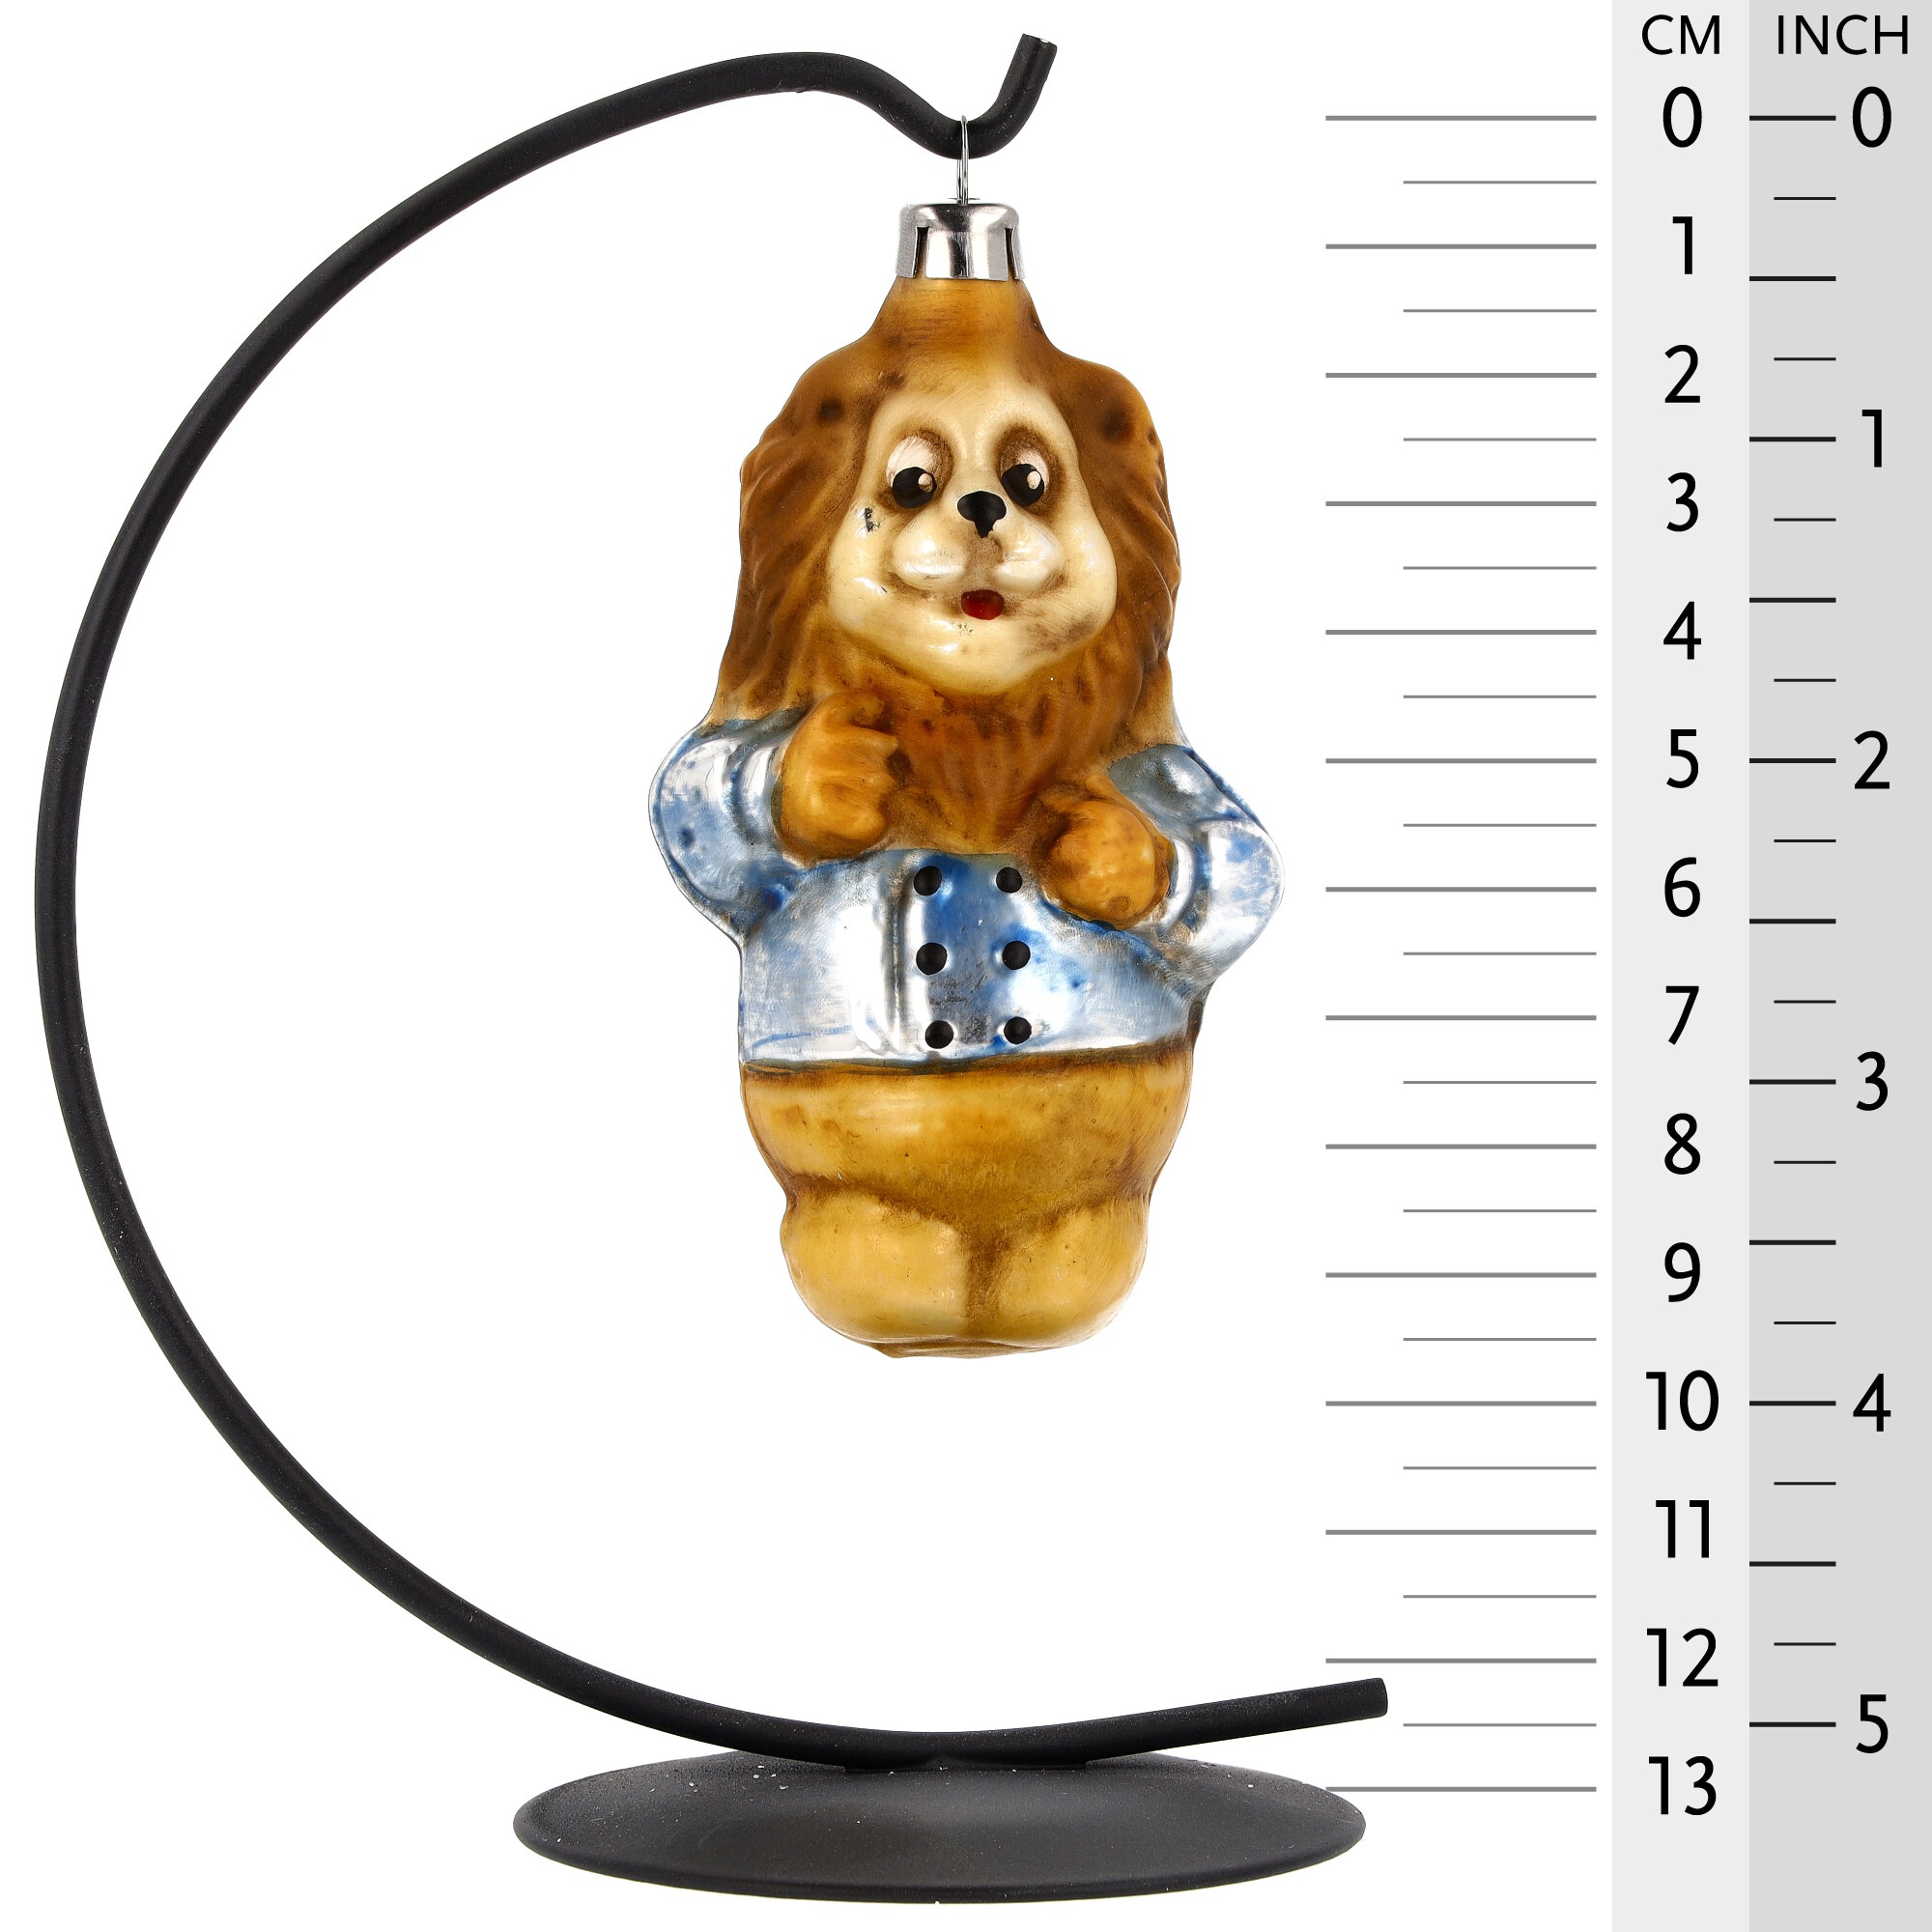 Retro Vintage style Christmas Glass Ornament - Lion with jacket